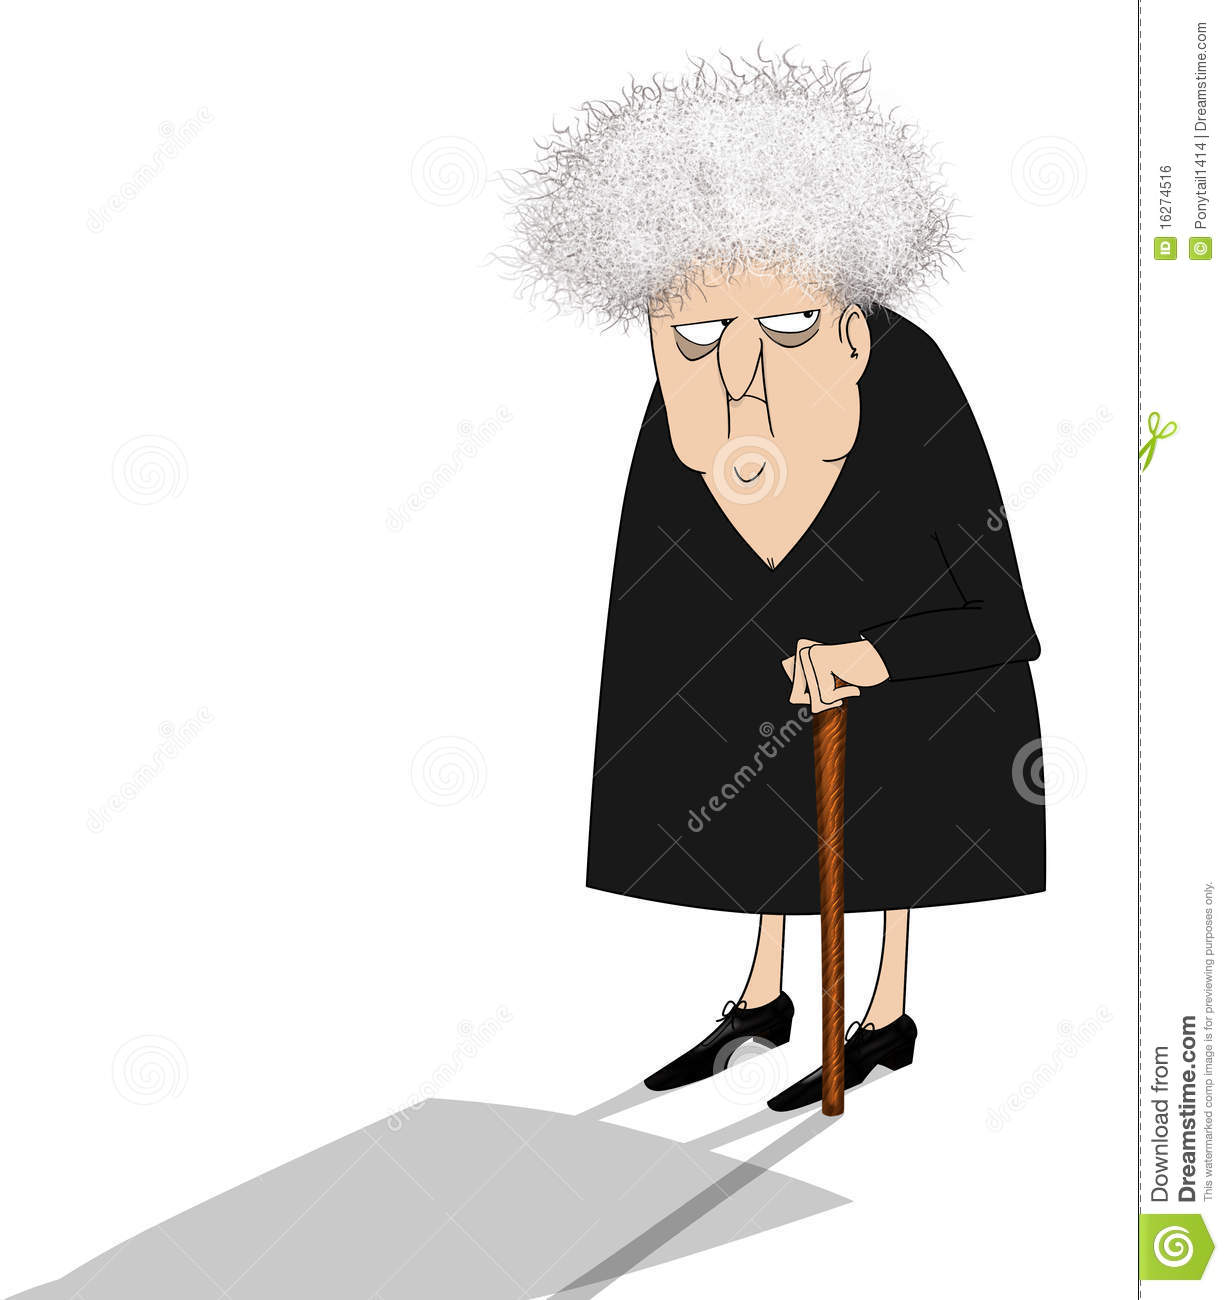 Cranky Old Lady Looking Suspicious Royalty Free Stock Image   Image    